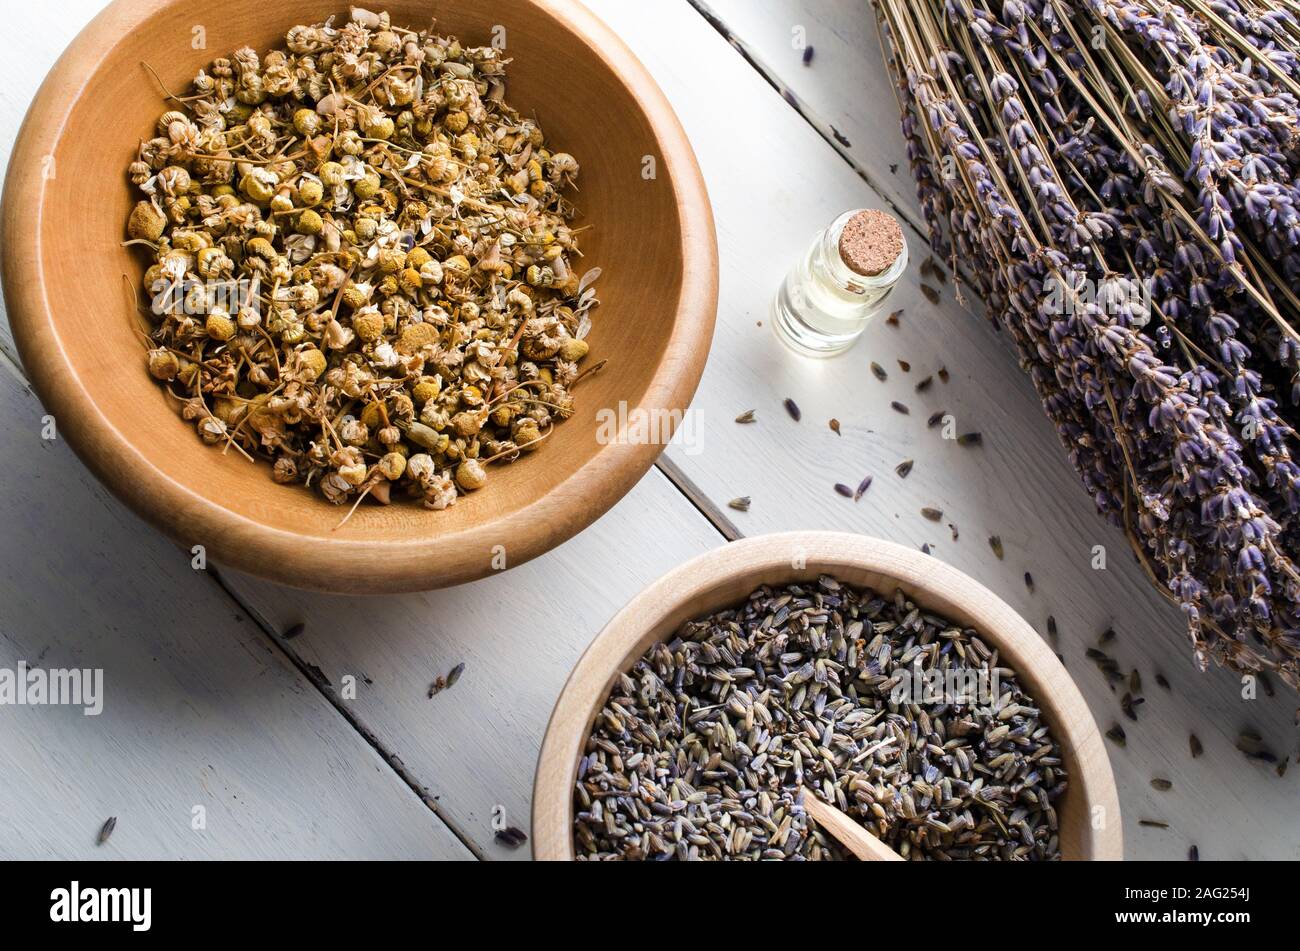 Angled overhead shot of dried herbs and essential oil. Includes wooden bowls of chamomile and lavender with a tied bunch of stemmed flowers to the sid Stock Photo